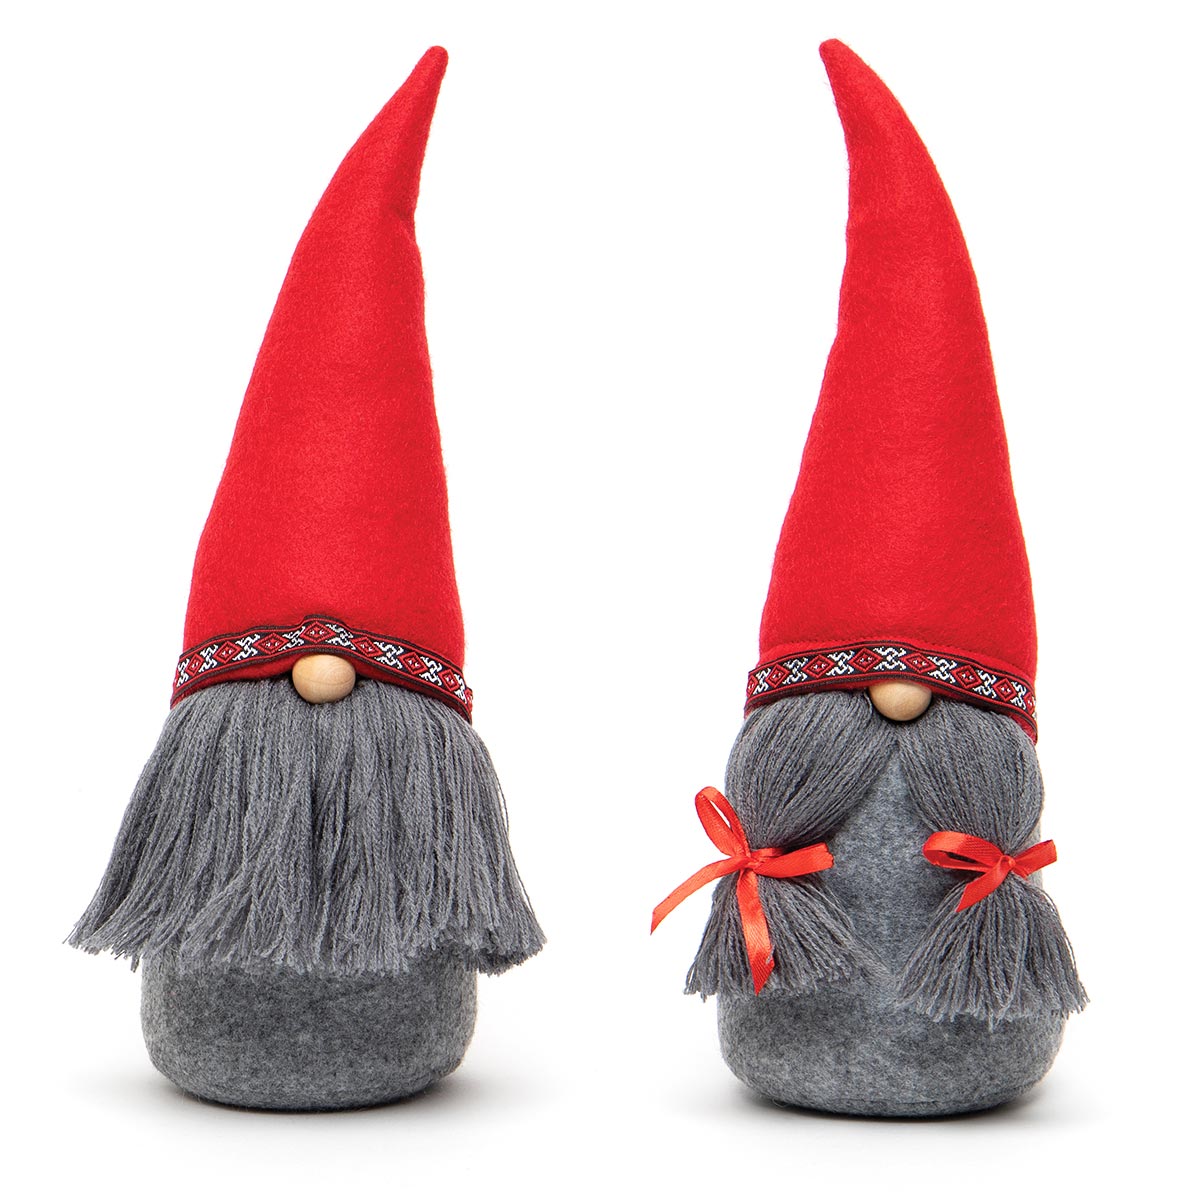 !FRITZ AND FREDA GNOME RED/GREY WITH HAT, WOOD NOSE AND b50